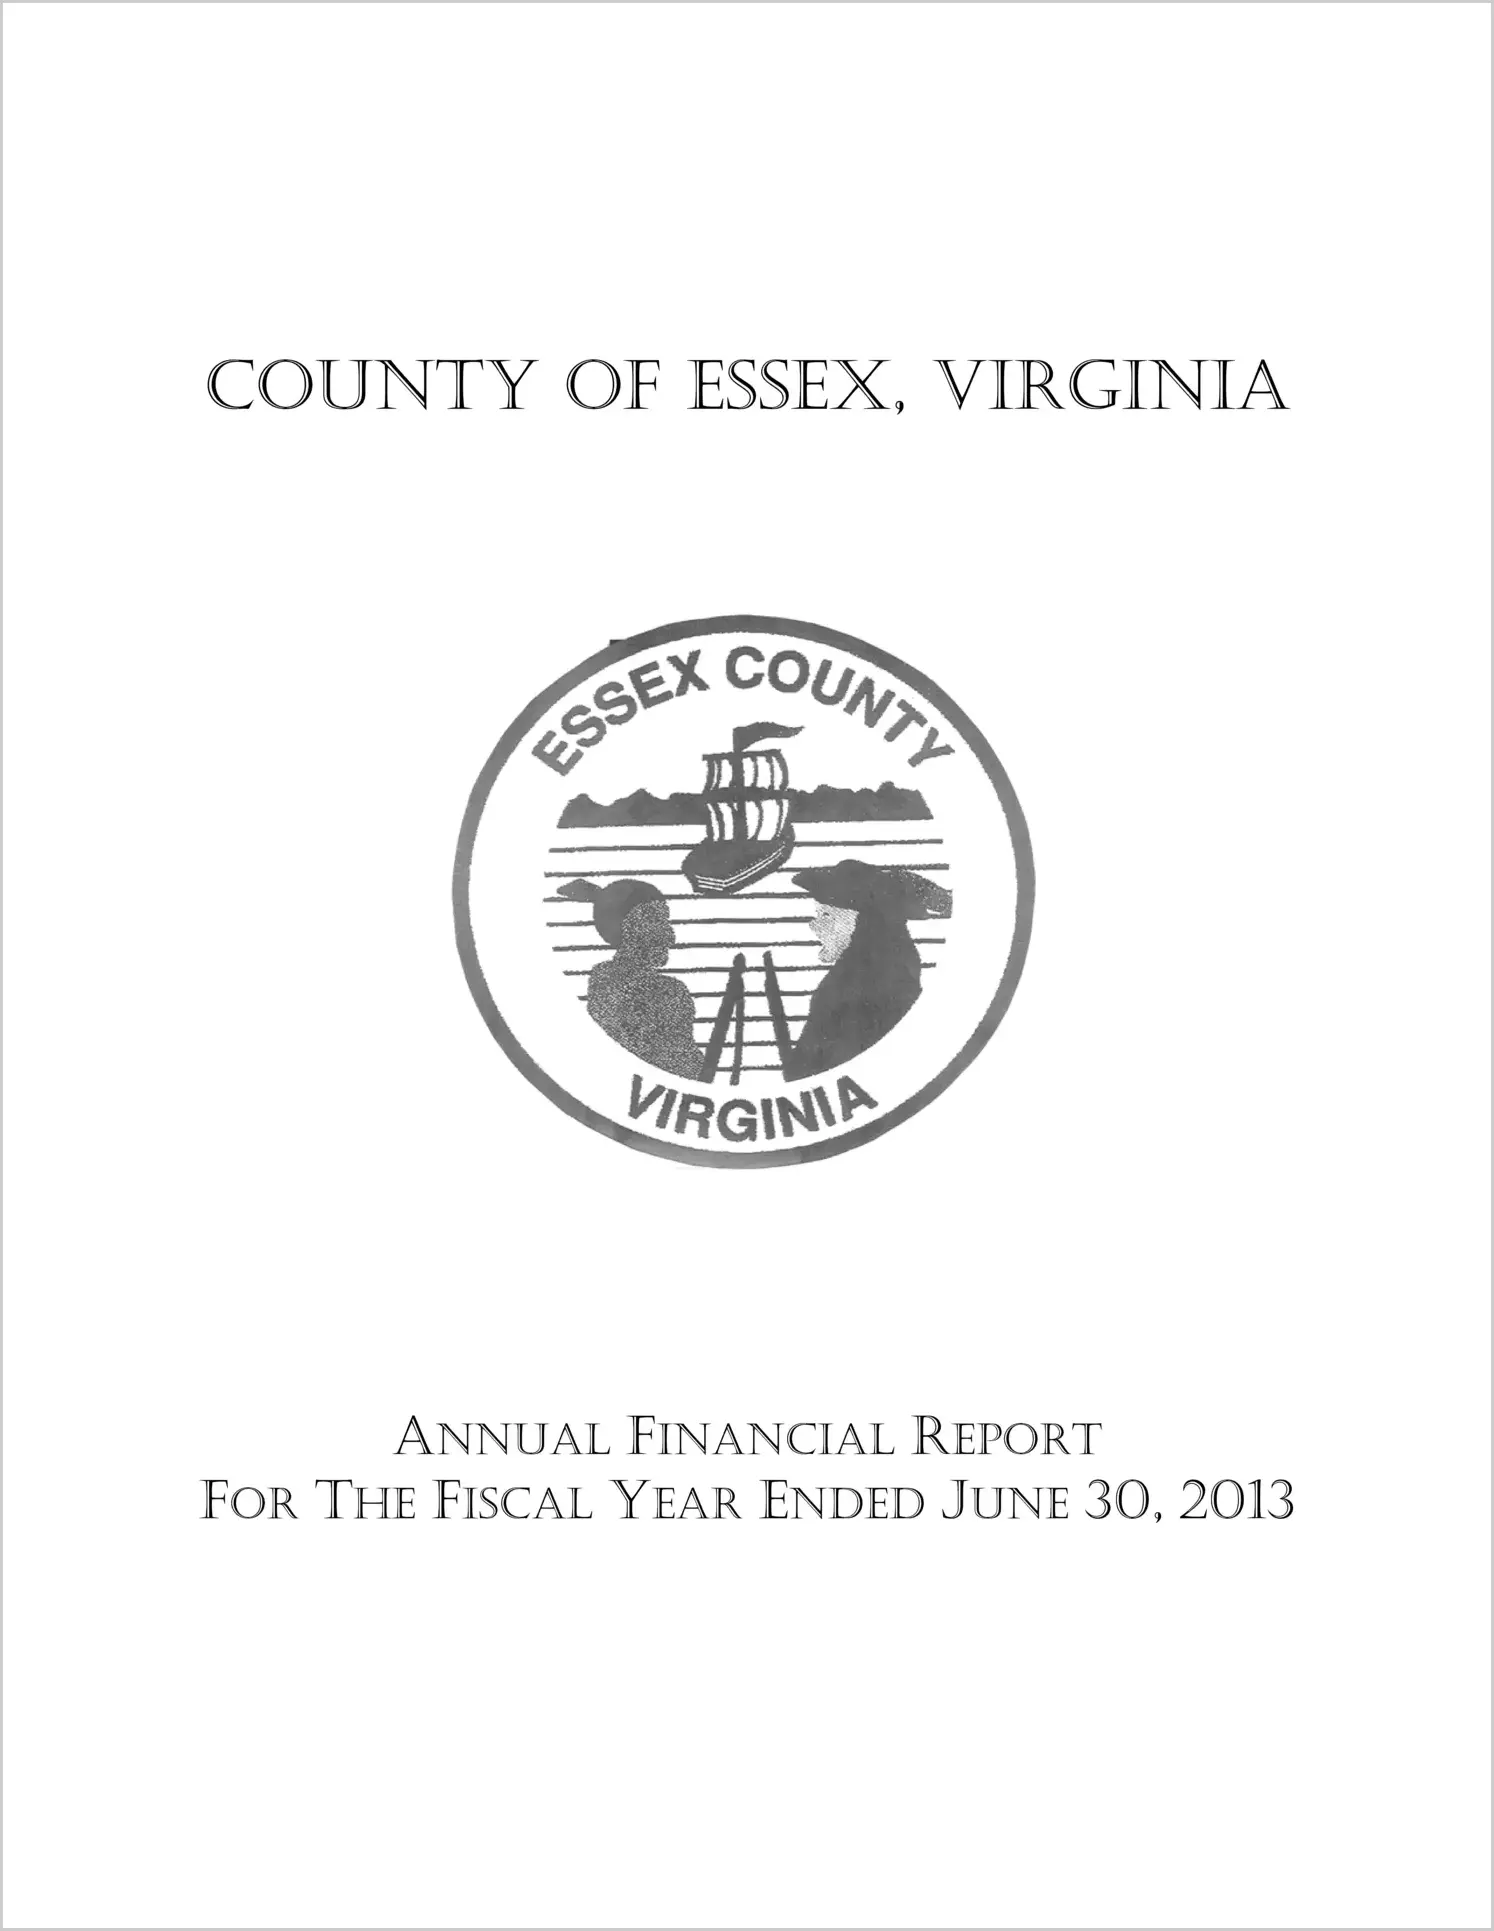 2013 Annual Financial Report for County of Essex